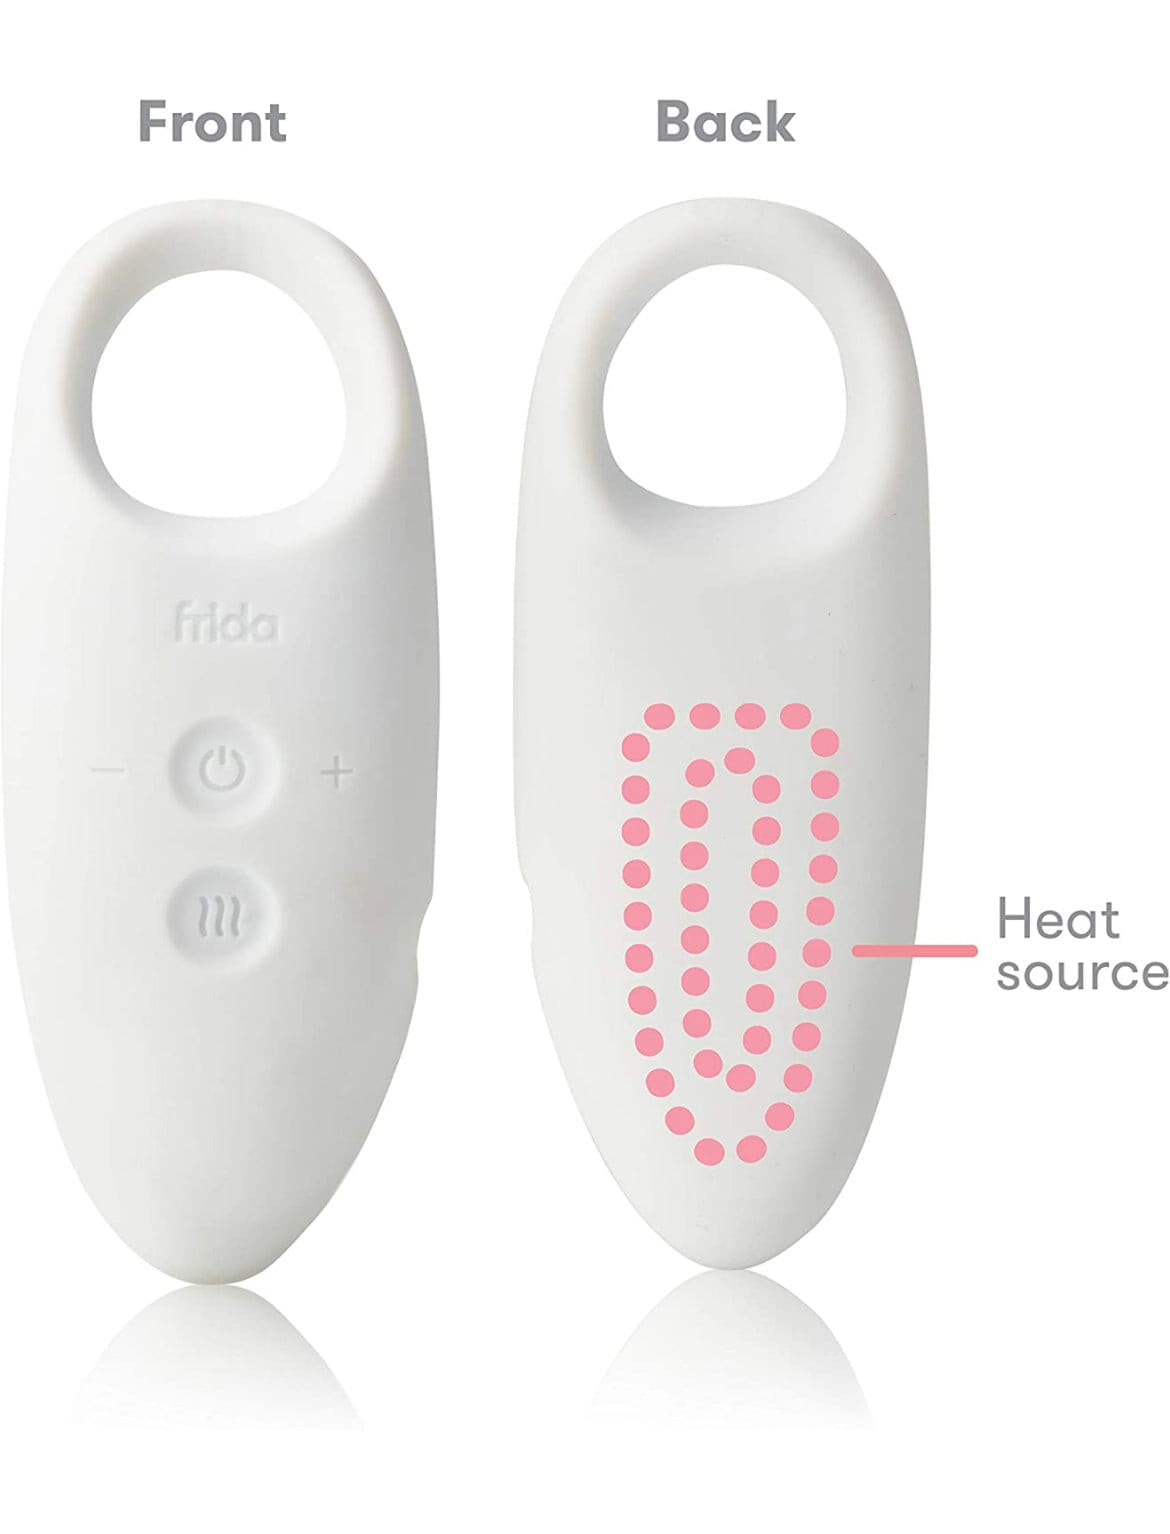 Frida Mom 2-in-1 Lactation Massager - Multiple Modes of Heat + Vibration for Clogged Milk Ducts, Increase Milk Flow, Breast Engorgement - USB Cord Included.